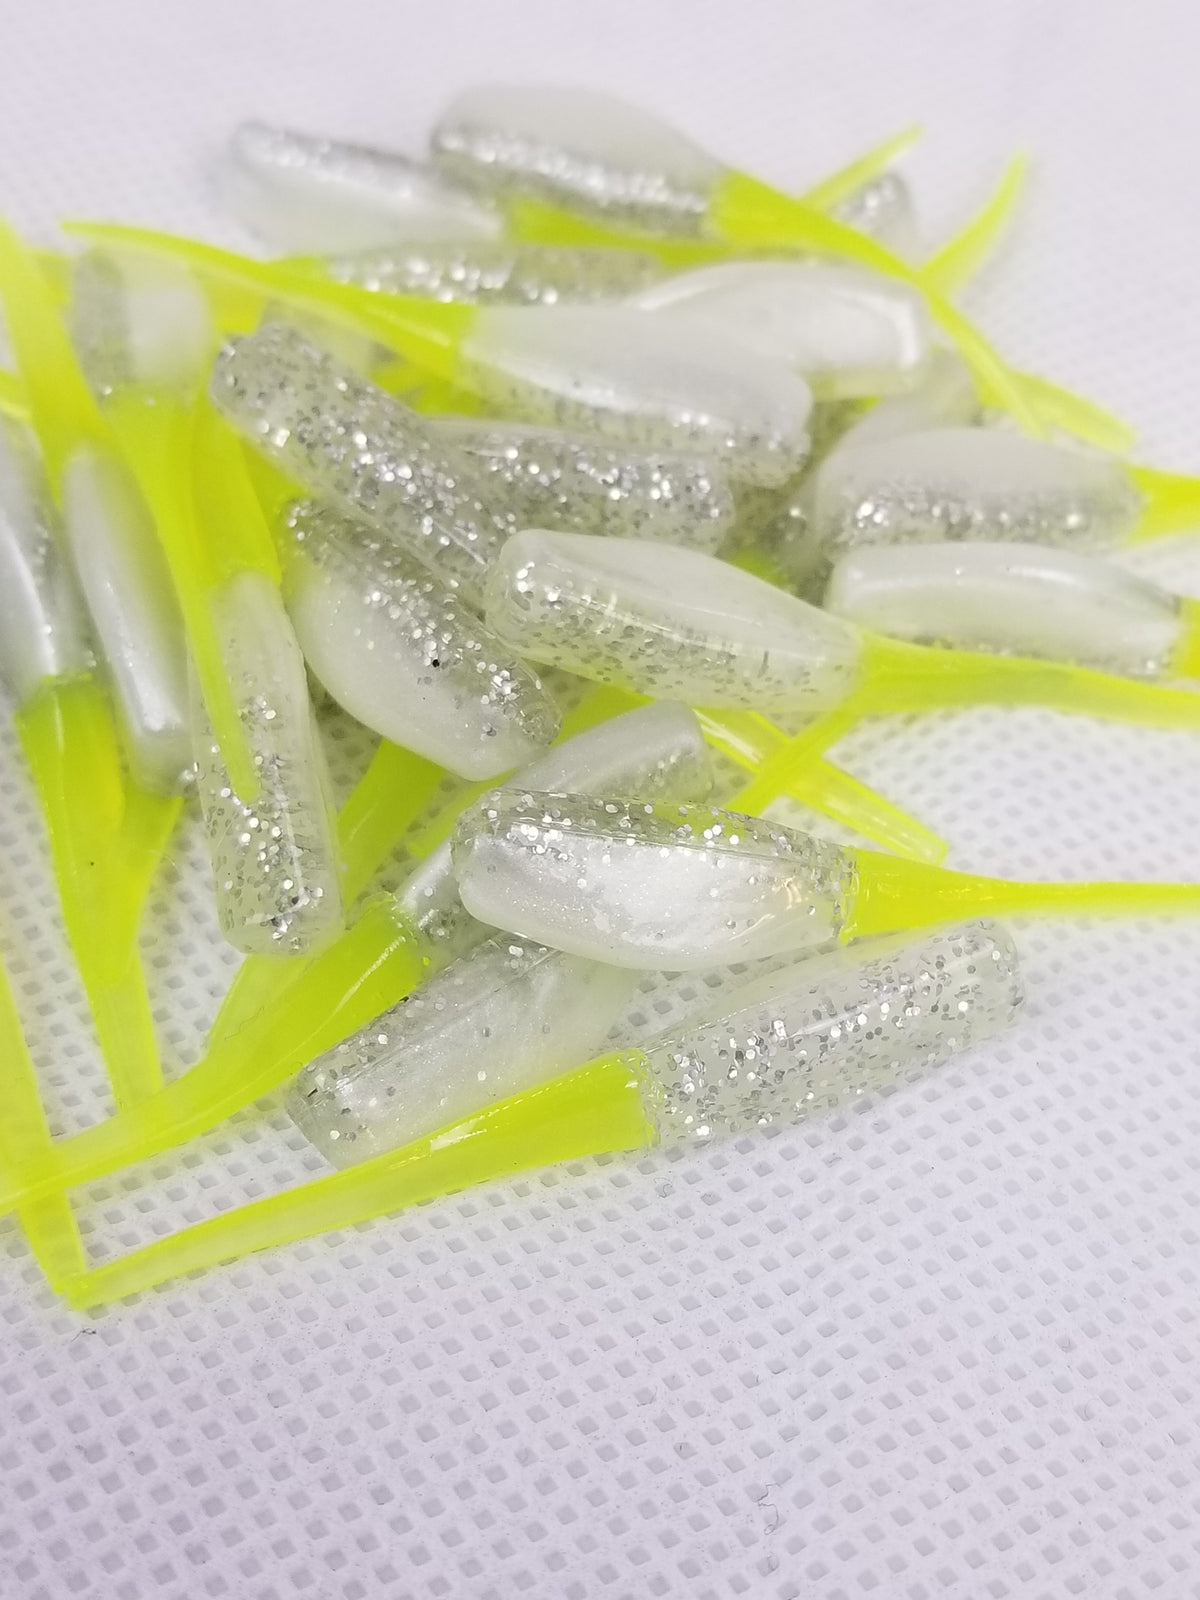 Cam's 2"(HOLOGRAM FLAKE)  Stinger Shad 40pc White Knight & Chartreuse Tail Crappie Soft Jigs [A Cam's Exclusive]